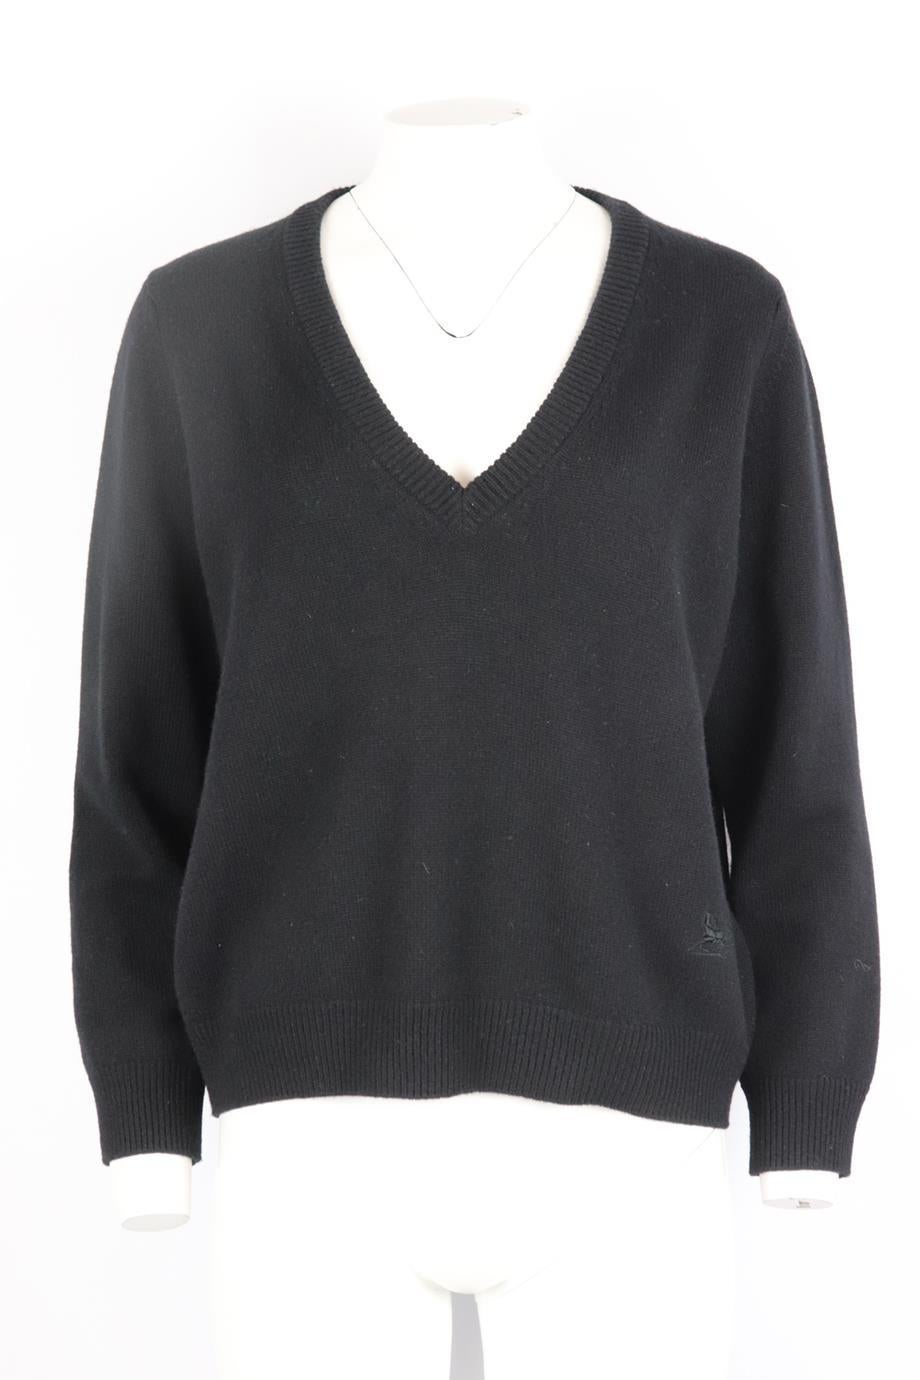 Celine embroidered cashmere sweater. Black. Long sleeve, scoop neck. 100% Cashmere. Size: Large (UK 12, US 8, FR 40, IT 44). Bust: 46 in. Waist: 46.4 in. Hips: 46.4 in. Length: 23.4 in. Very good condition - No sign of wear; see pictures.